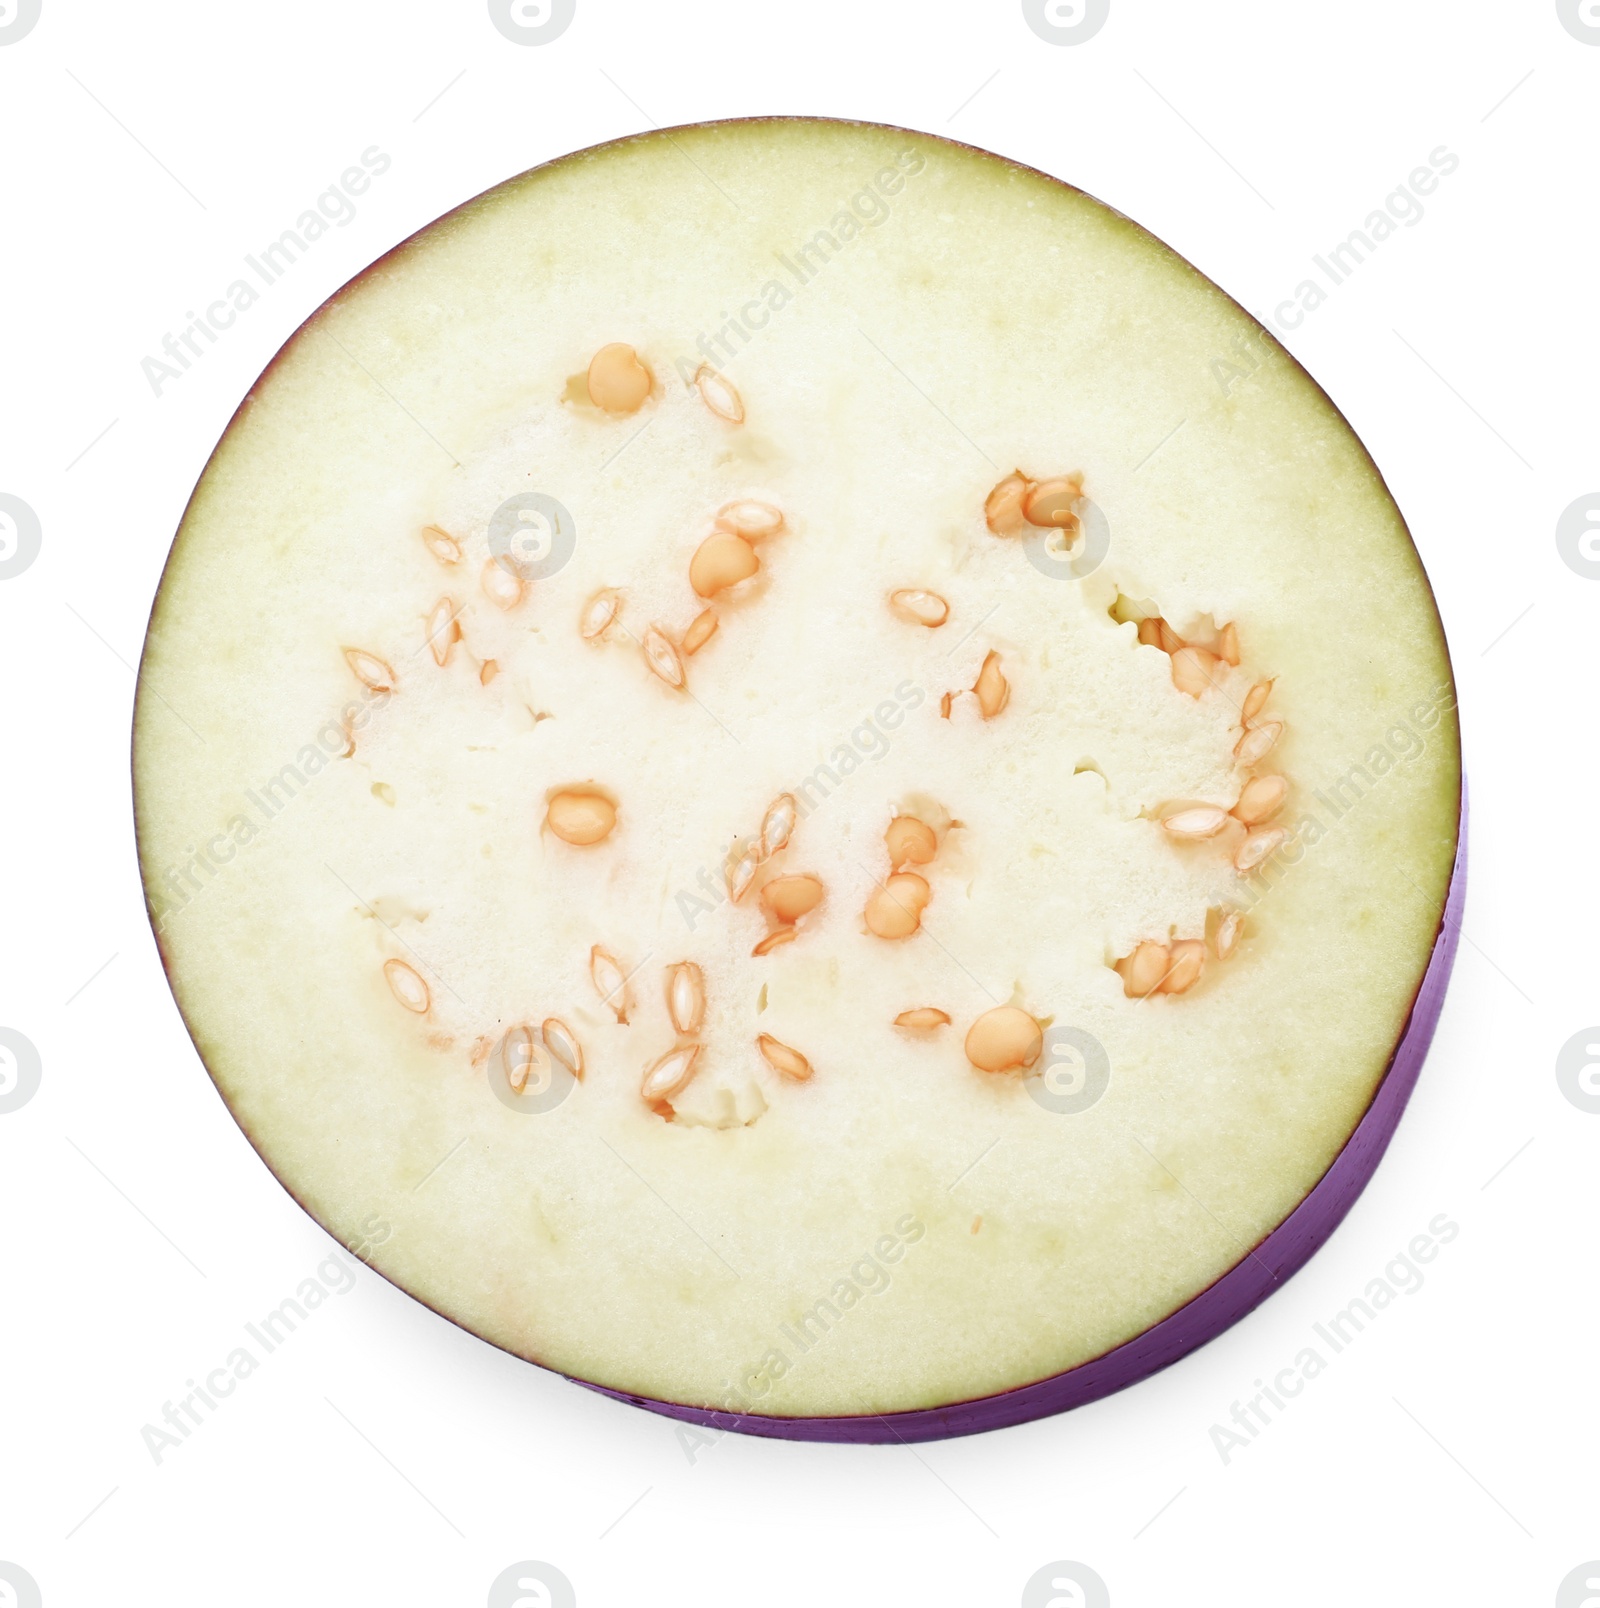 Photo of Slice of ripe eggplant isolated on white, top view